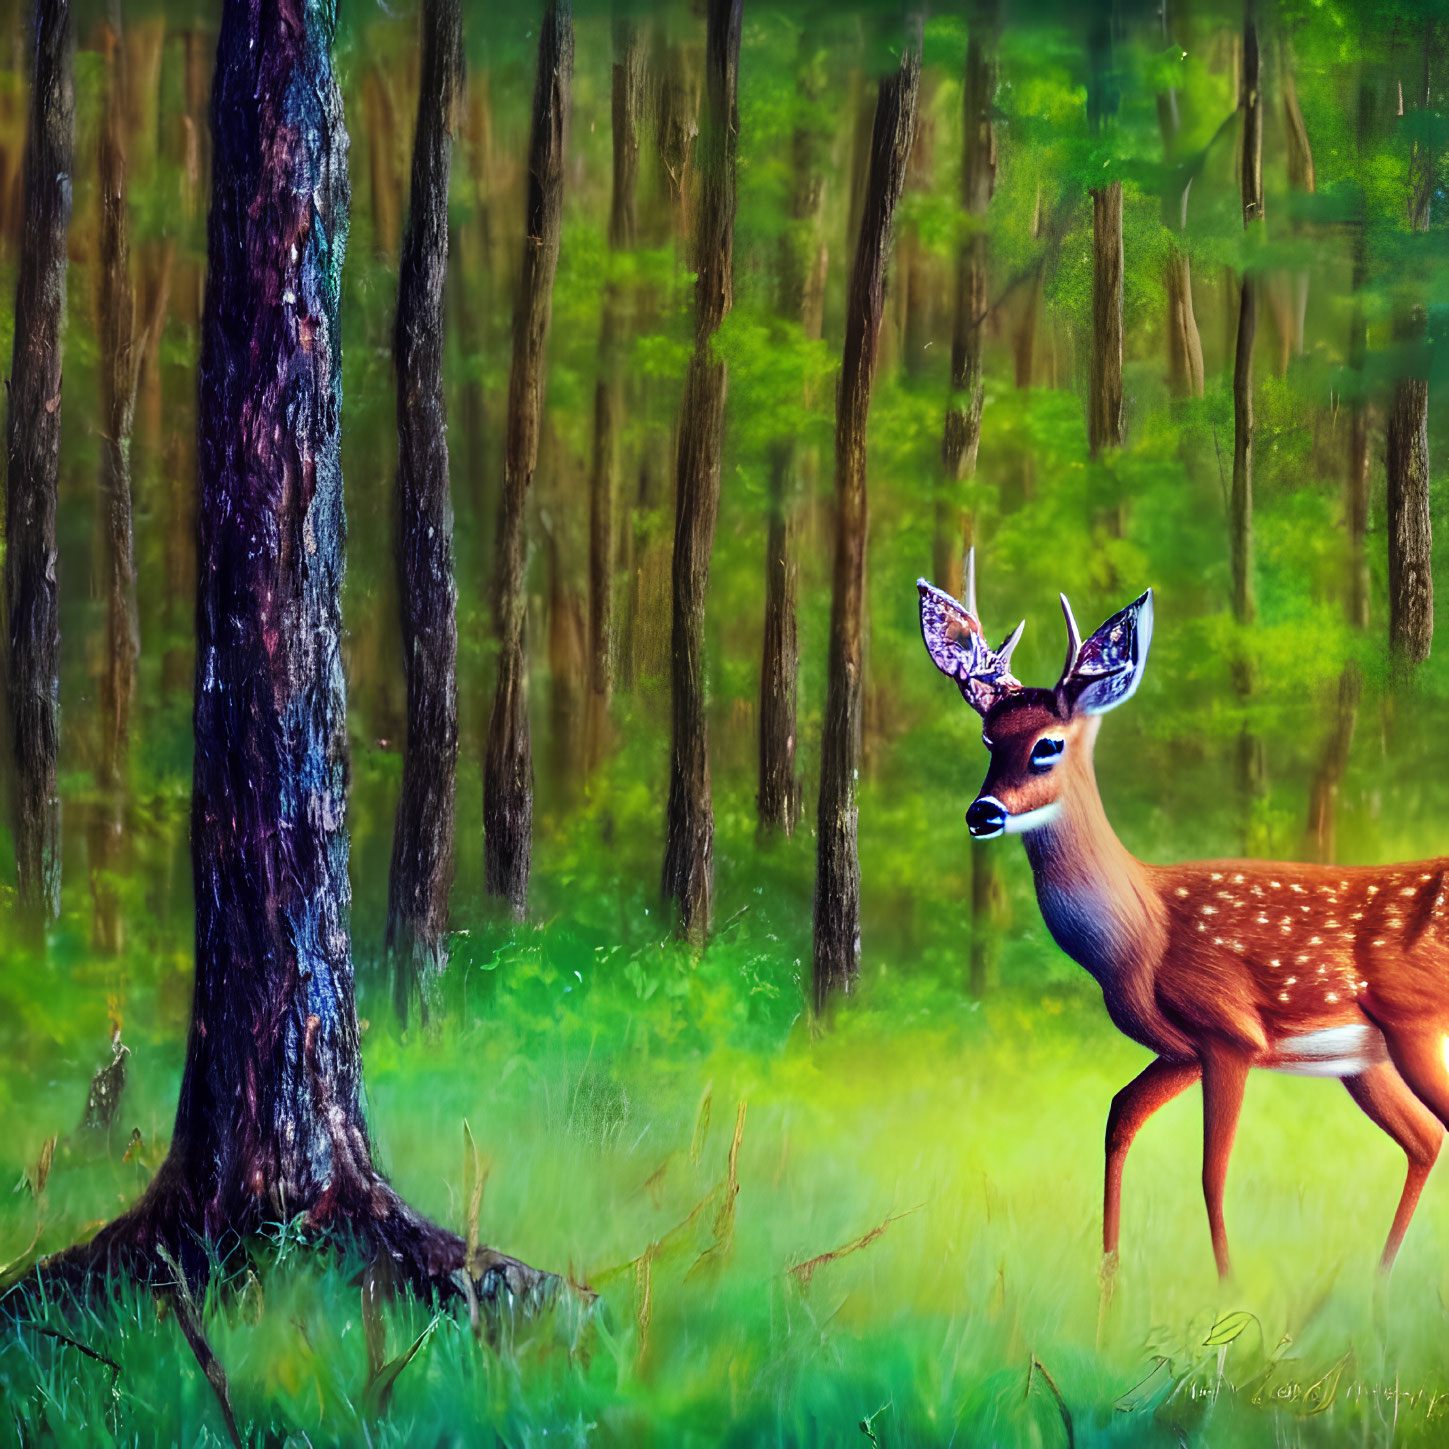 Digital Artwork: Young Deer with Illuminated Antlers in Vibrant Forest